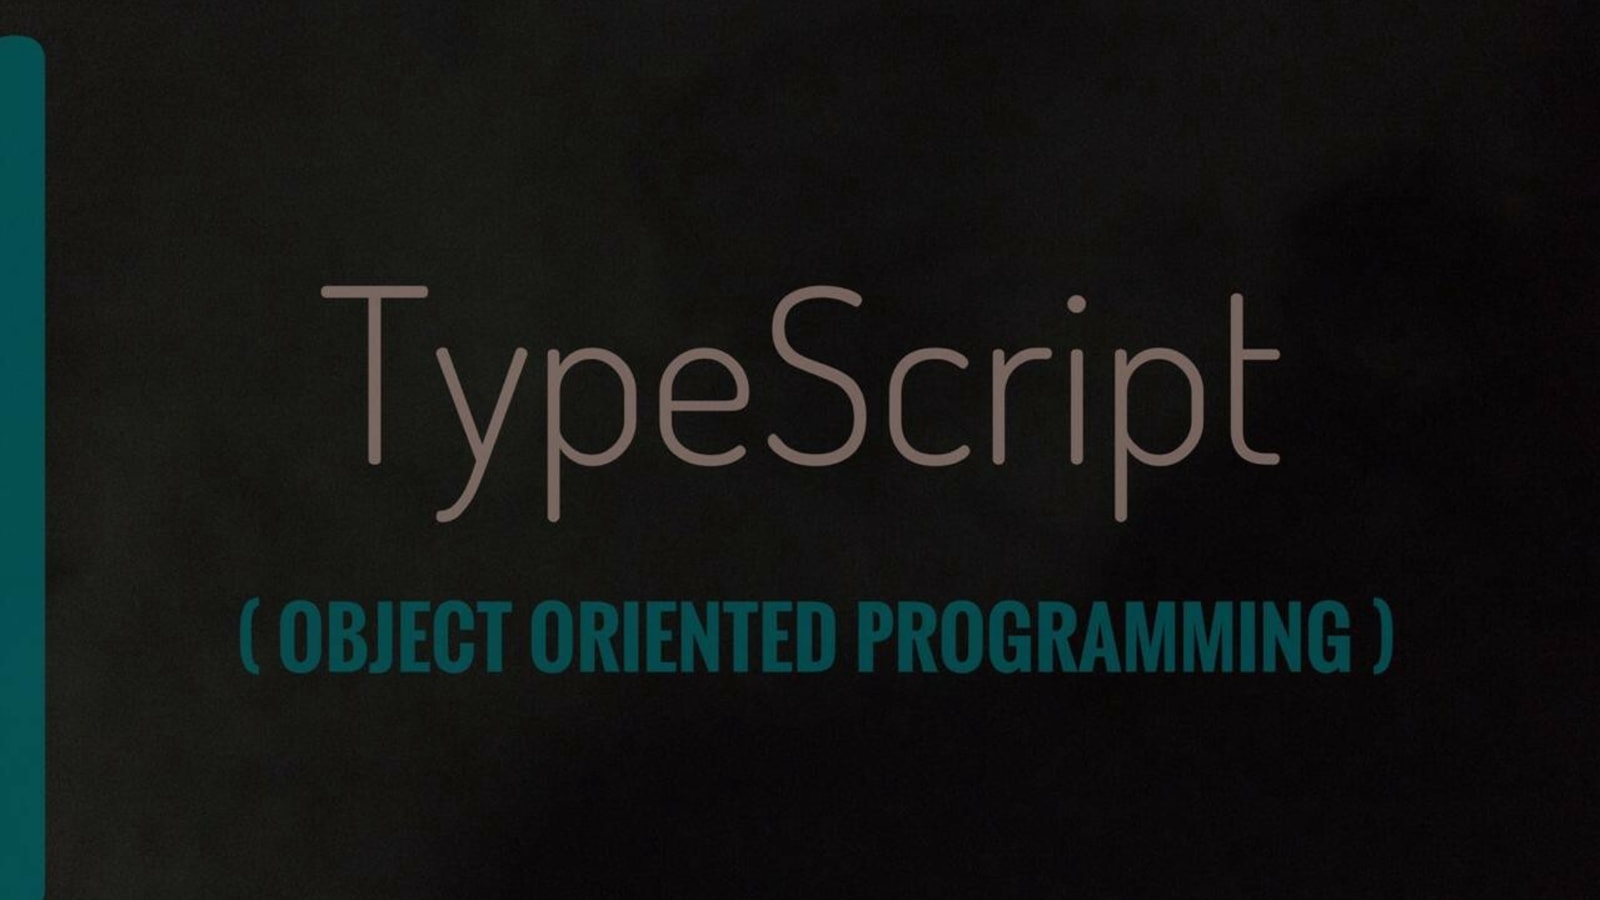 Implements and Extends, Object Oriented TypeScript - gavsblog